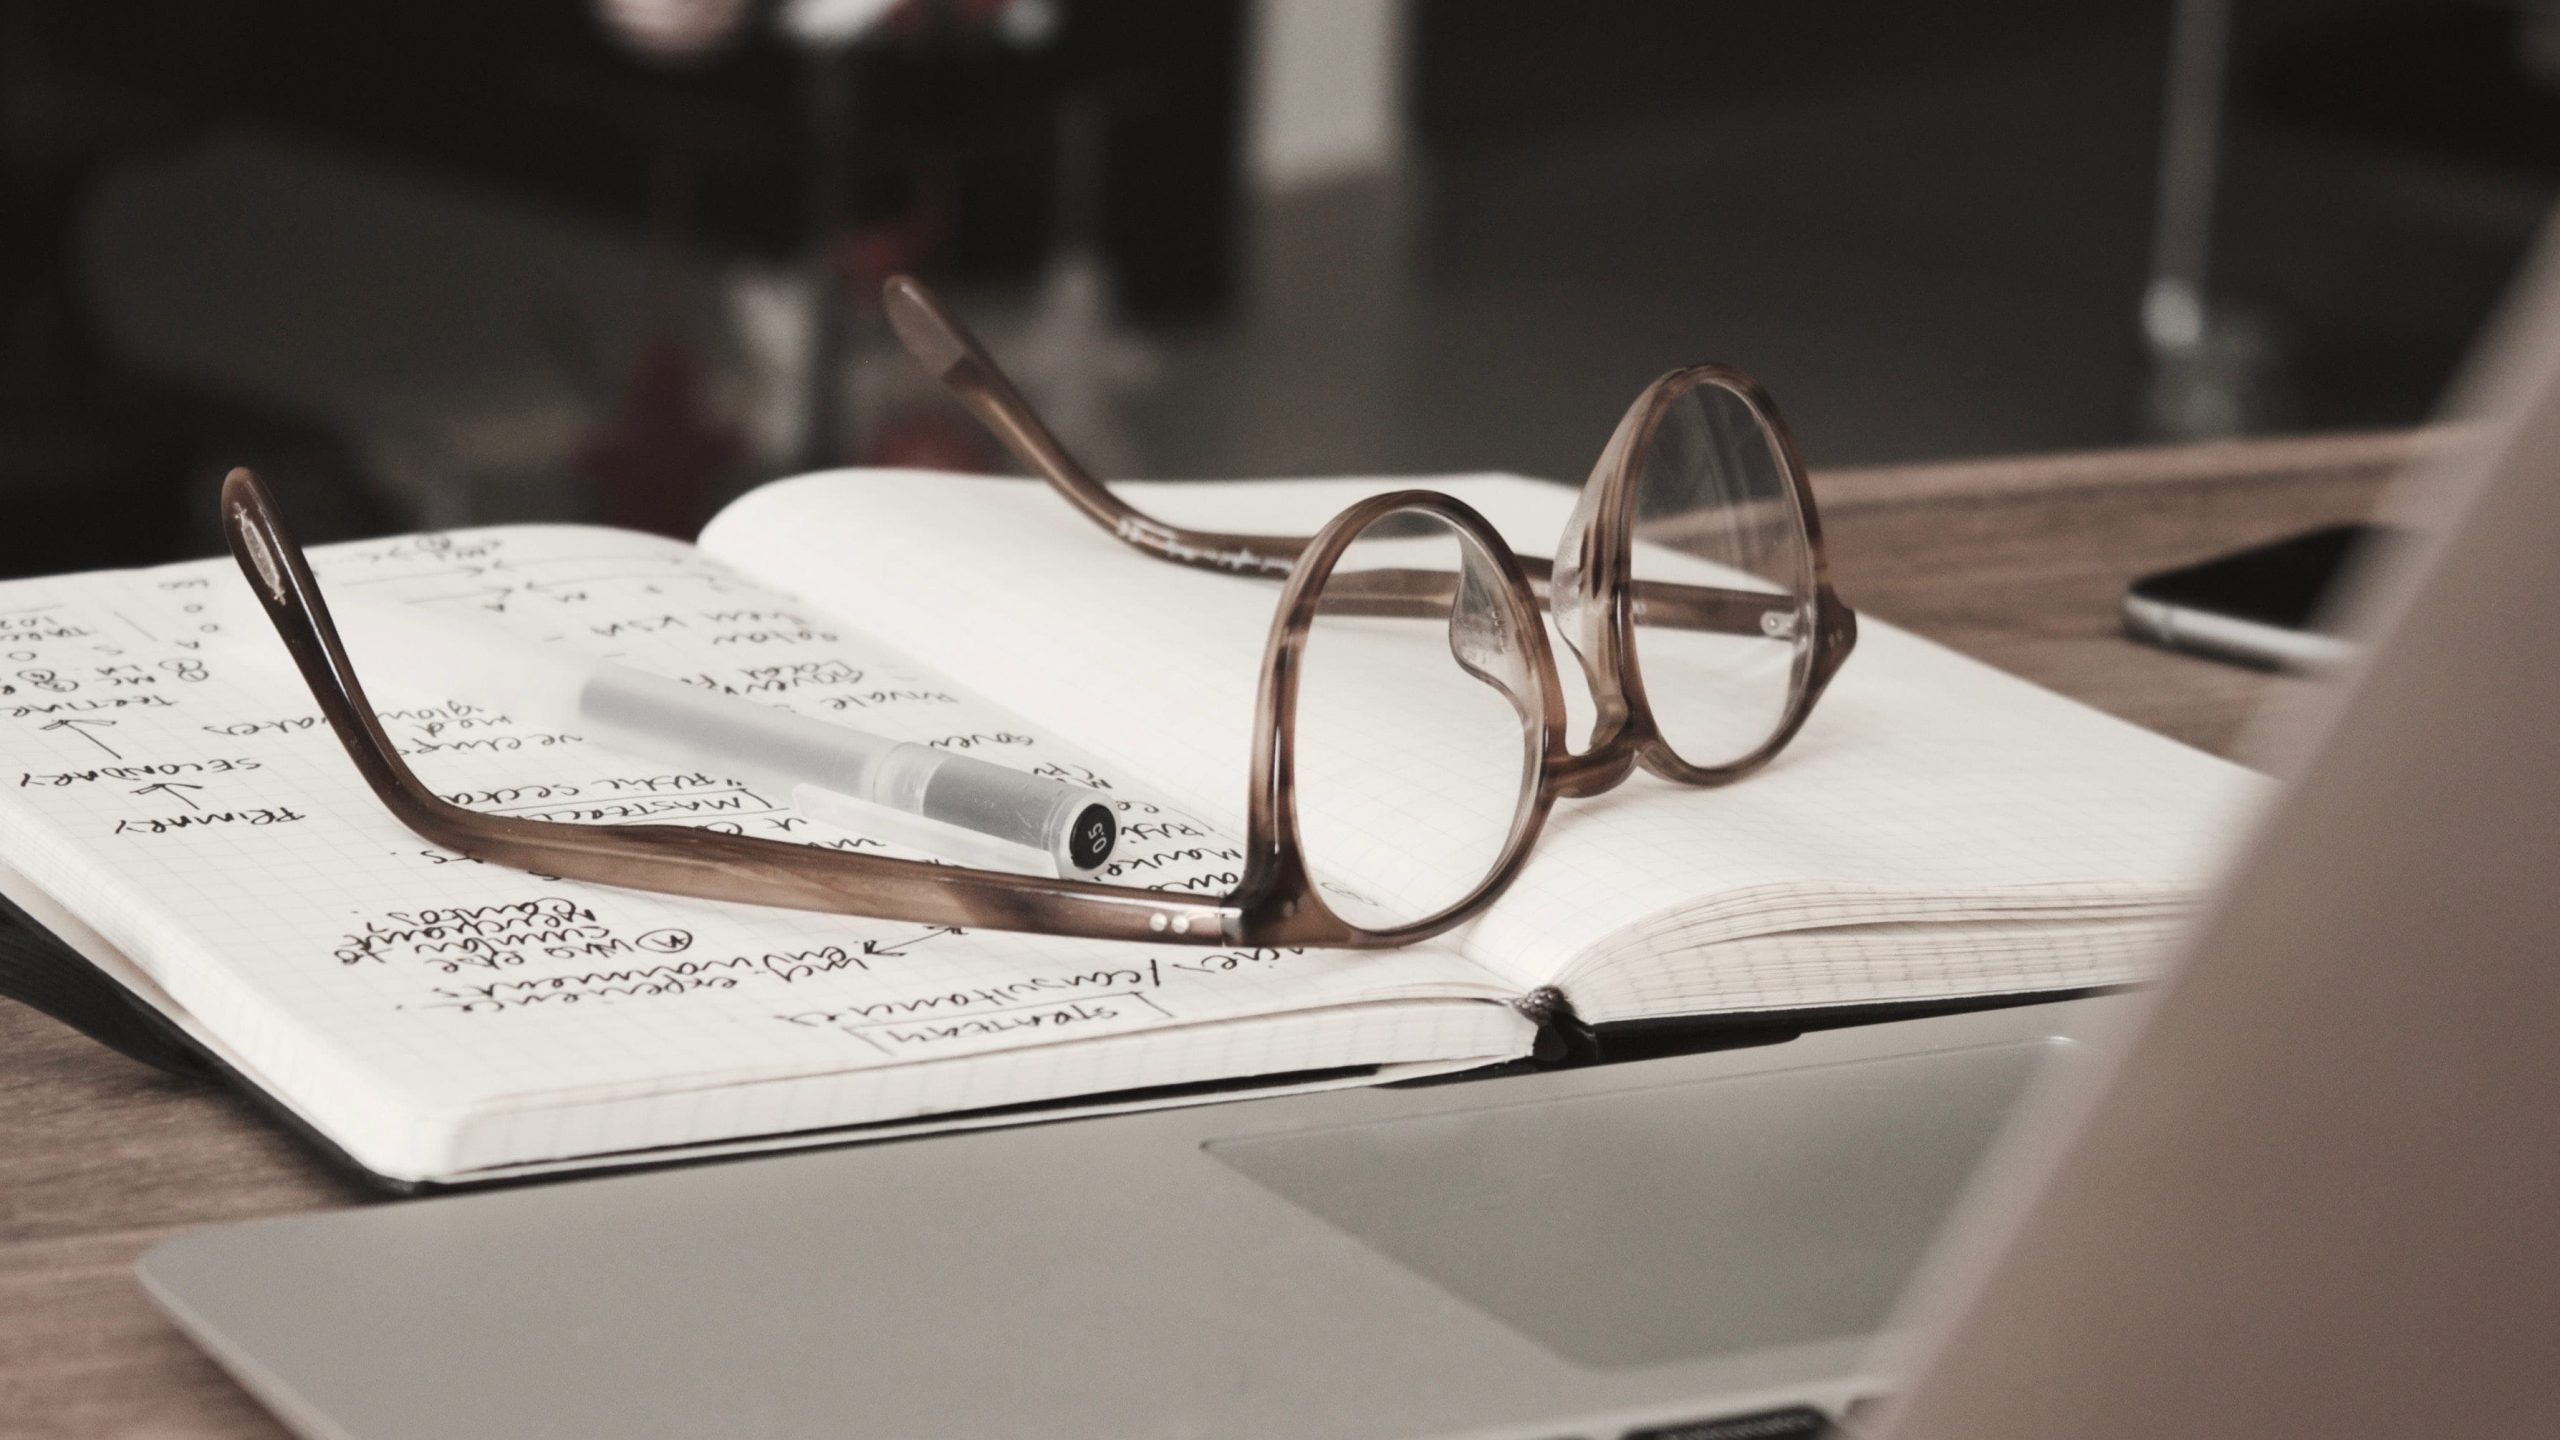 A pair of glasses on an notebook in front of a laptop